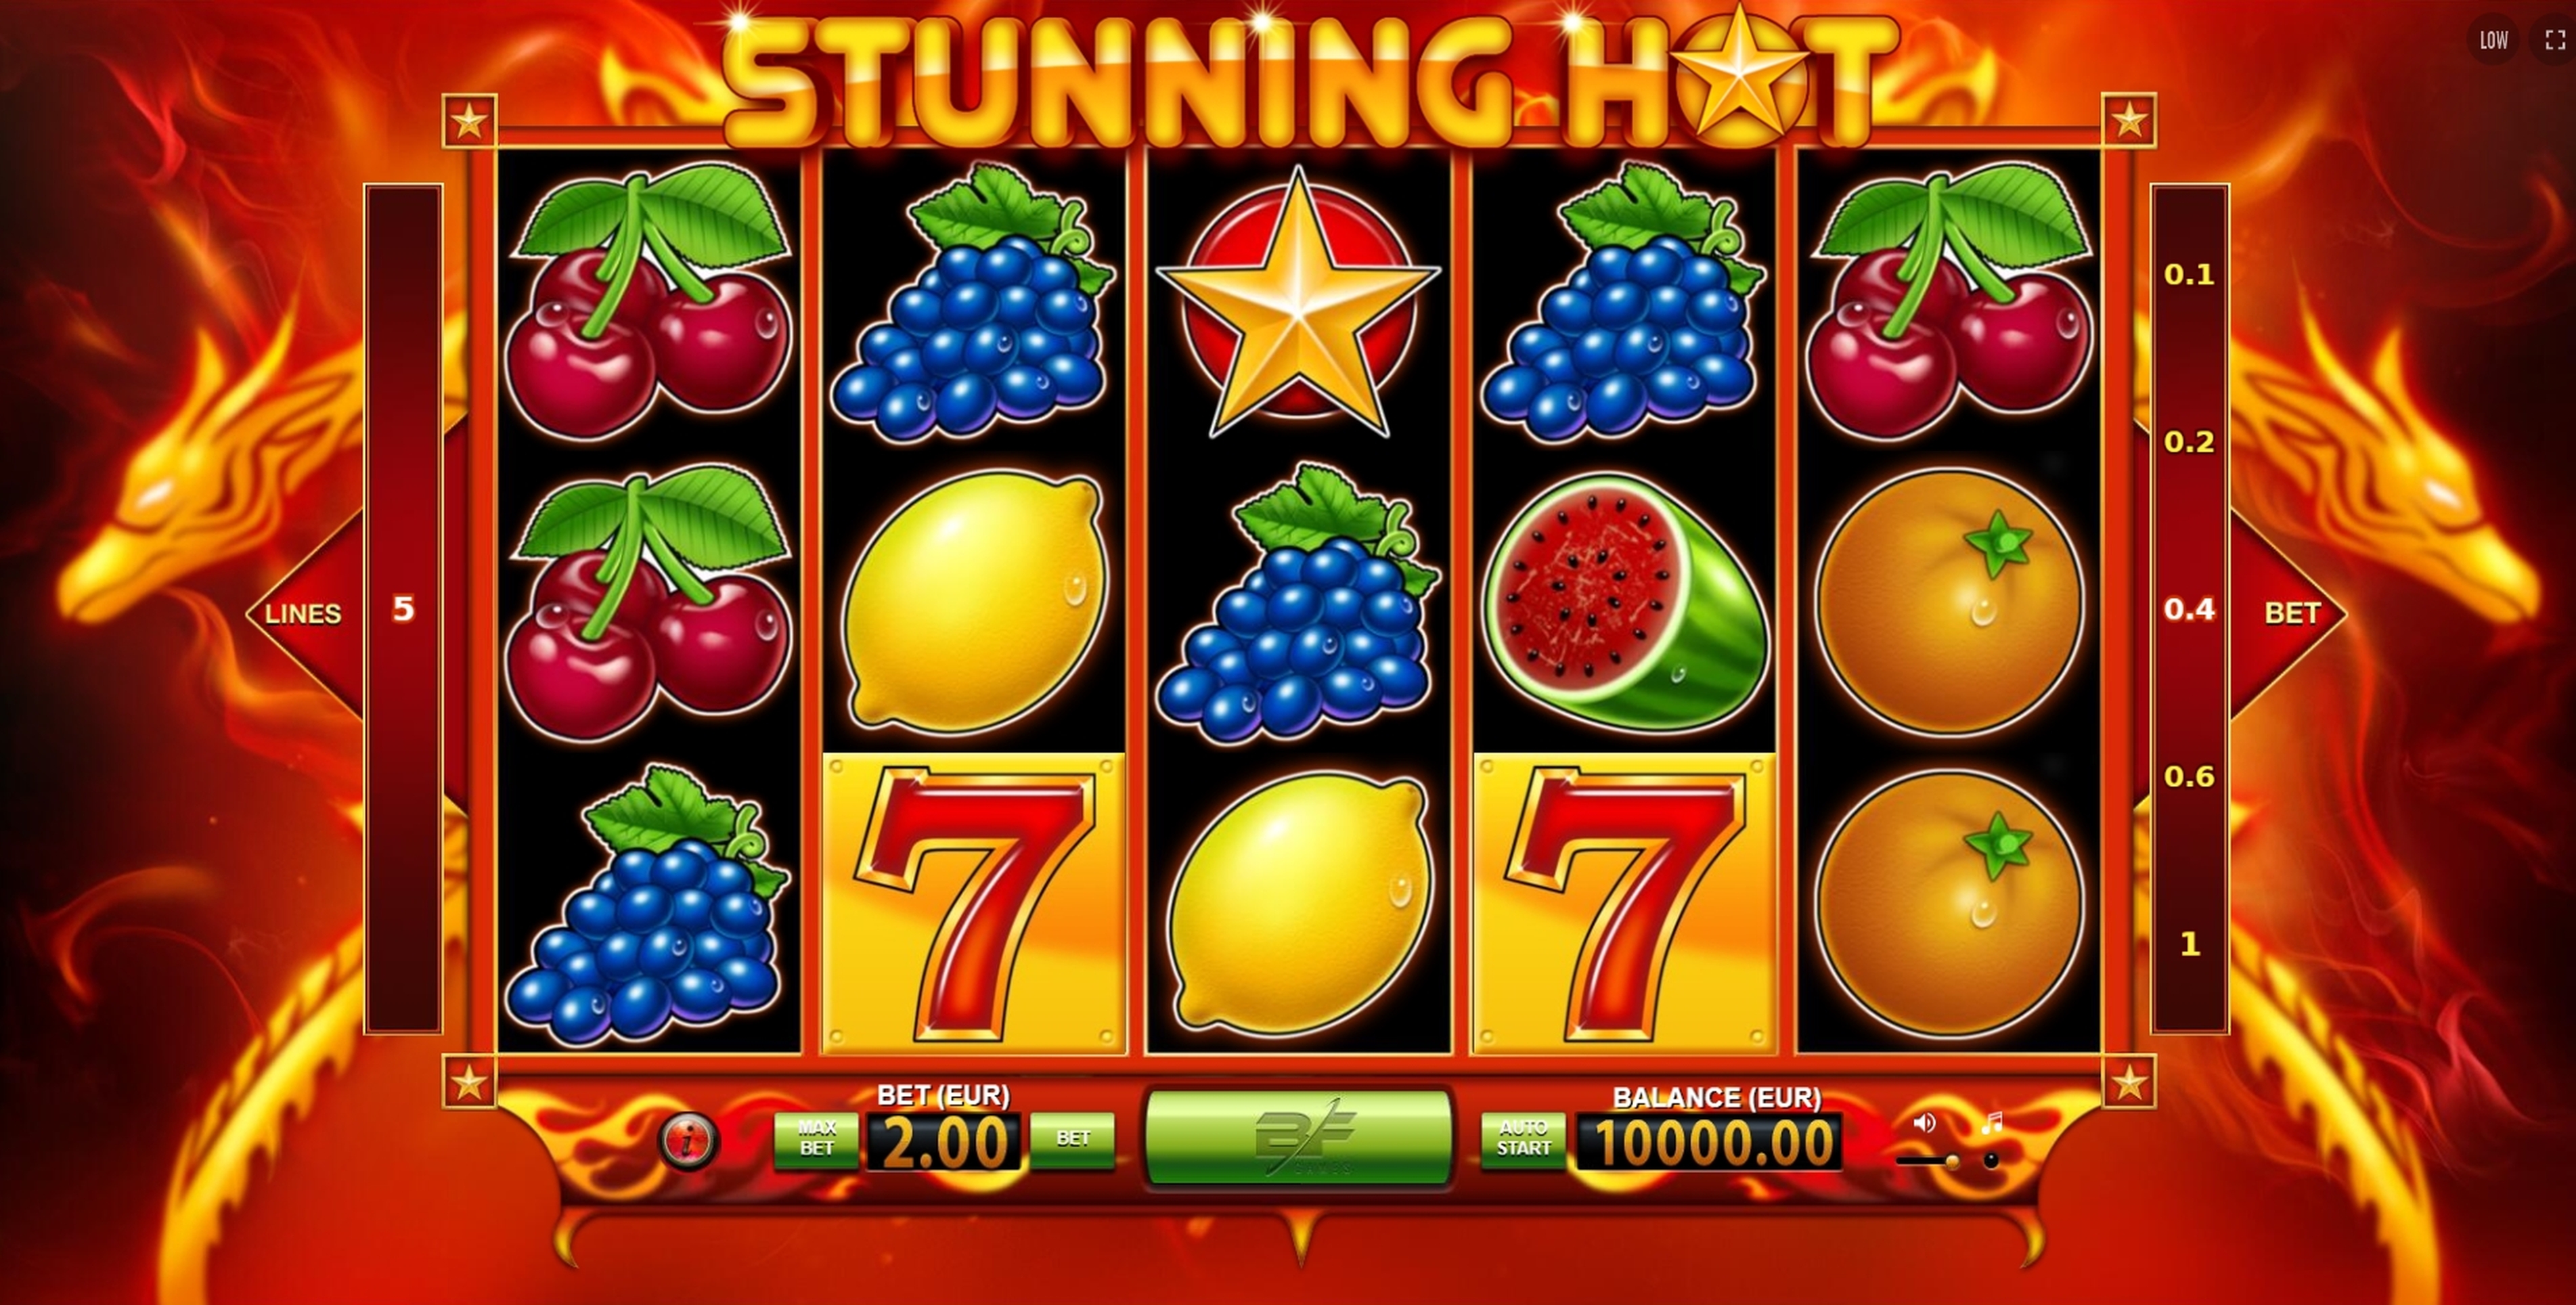 Reels in Stunning Hot Slot Game by BF Games